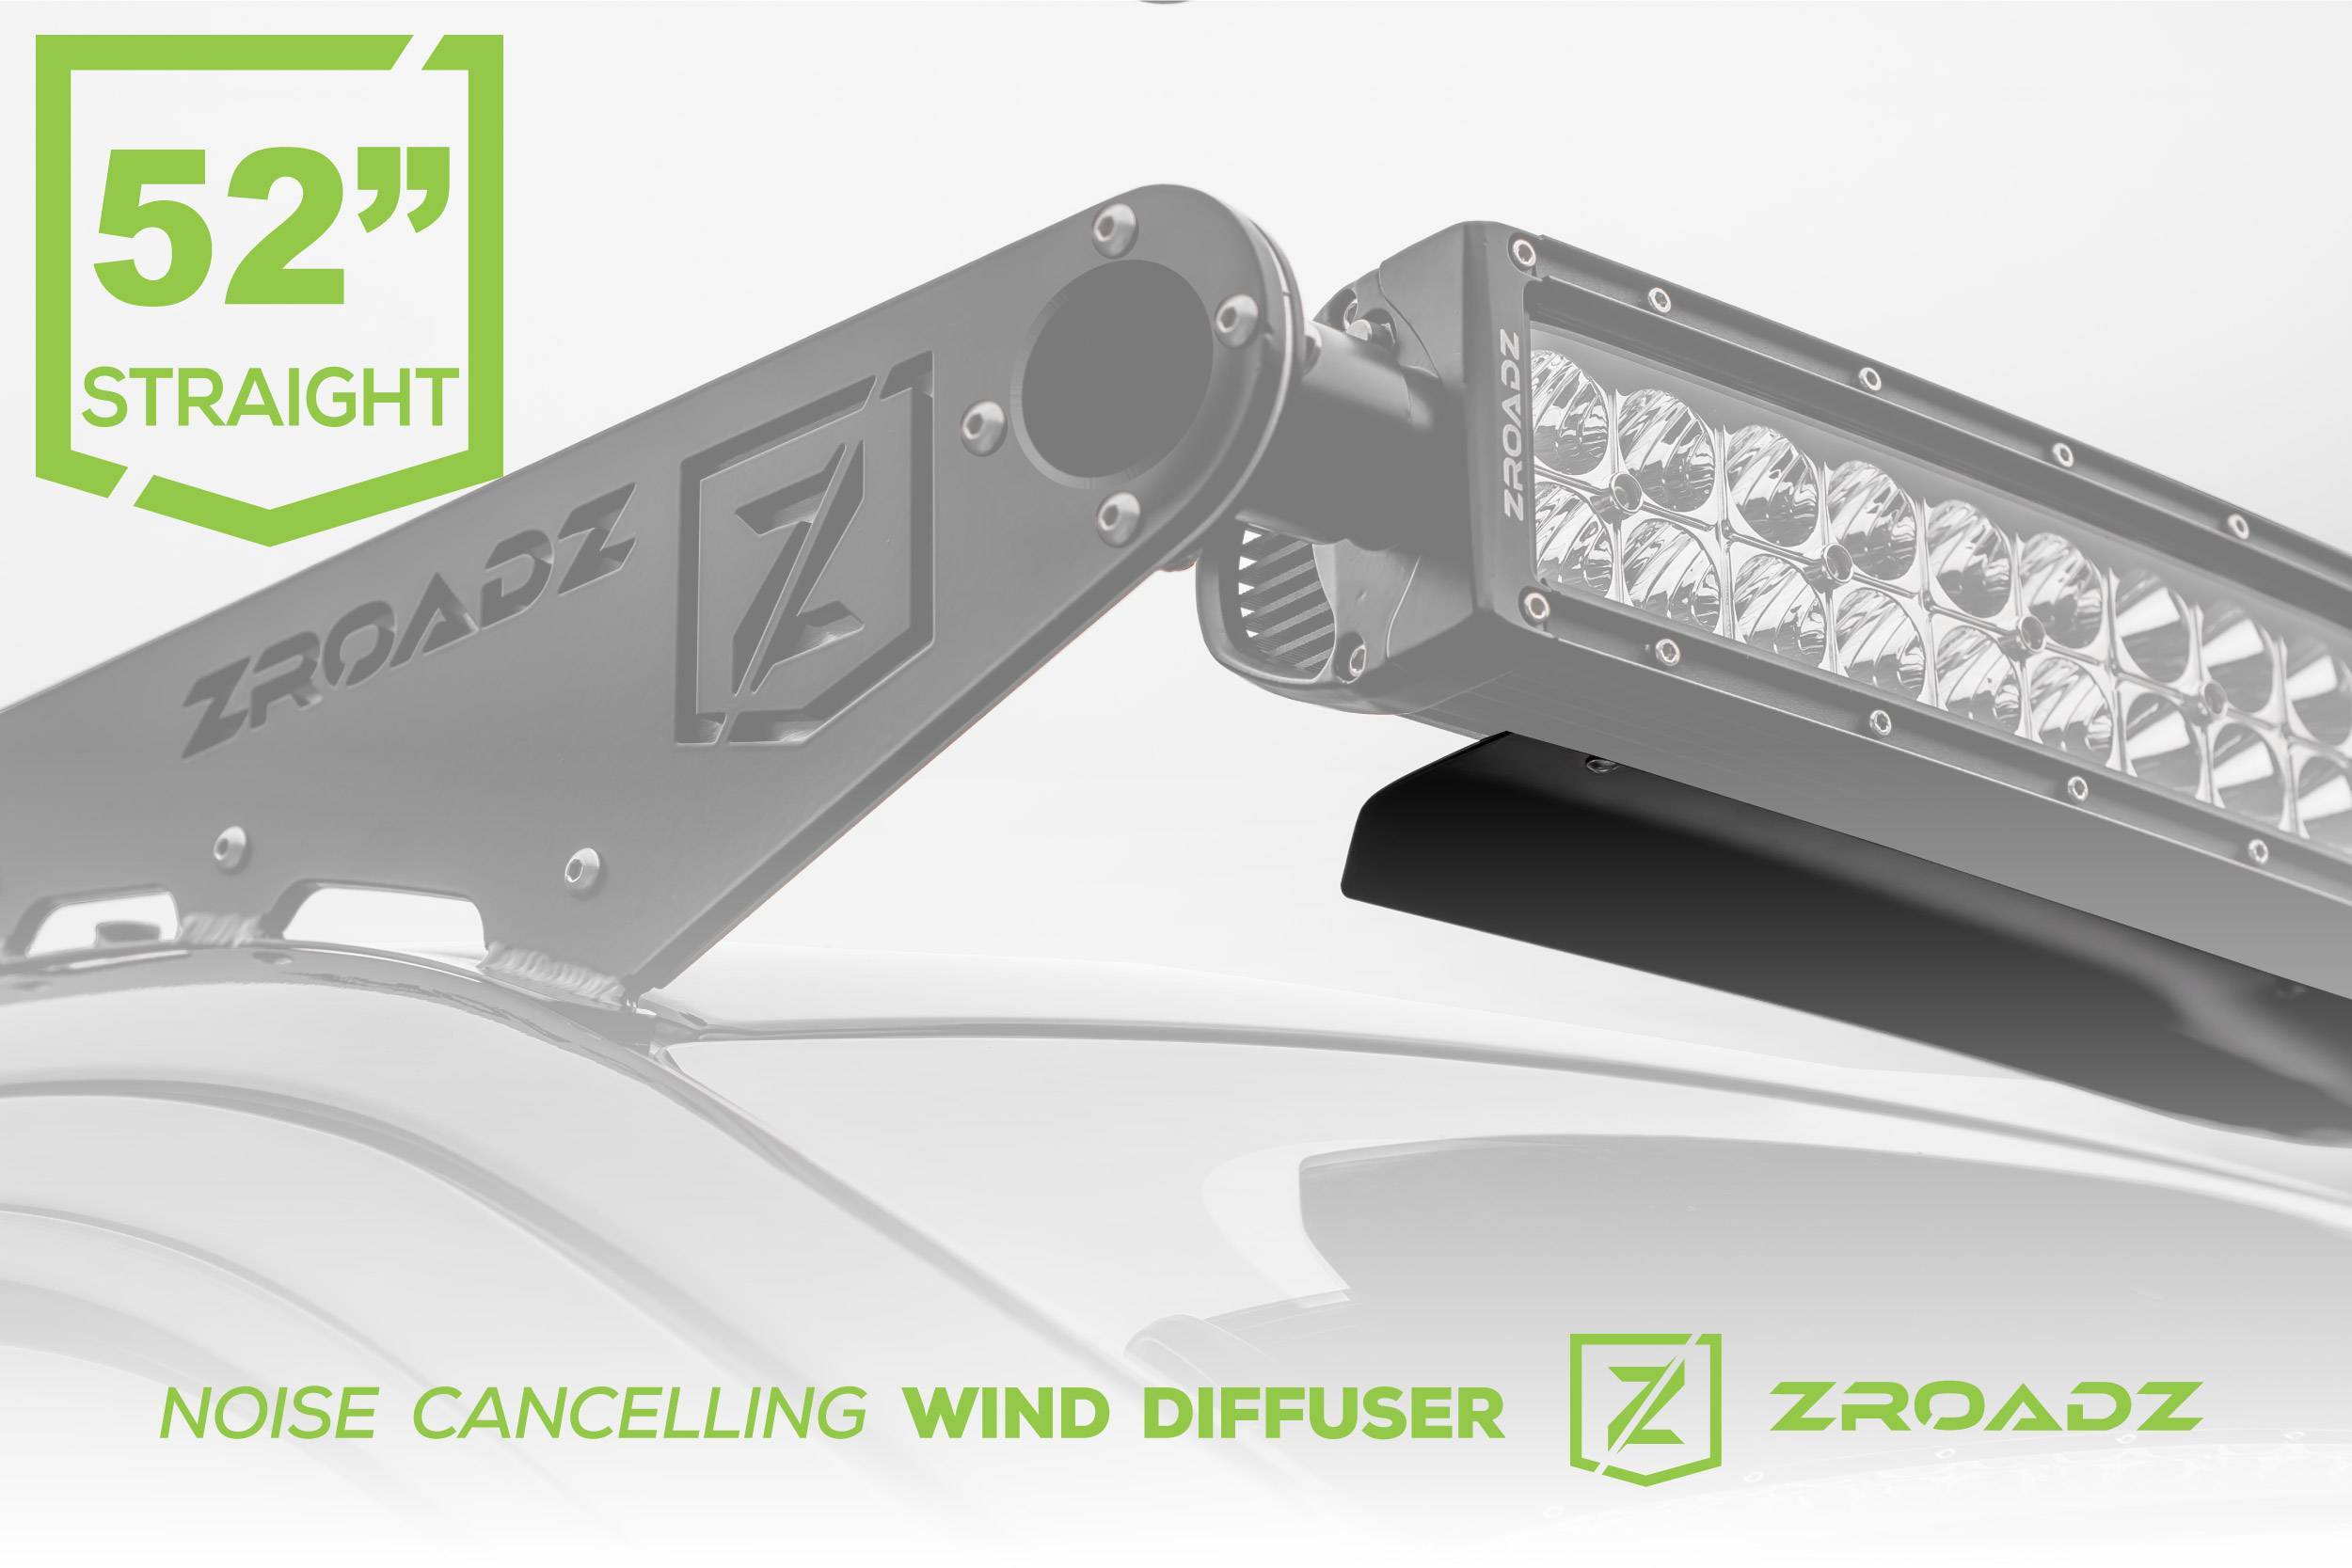 ZROADZ OFF ROAD PRODUCTS - Noise Cancelling Wind Diffuser for (1) 52 Inch Straight LED Light Bar - PN #Z330052S